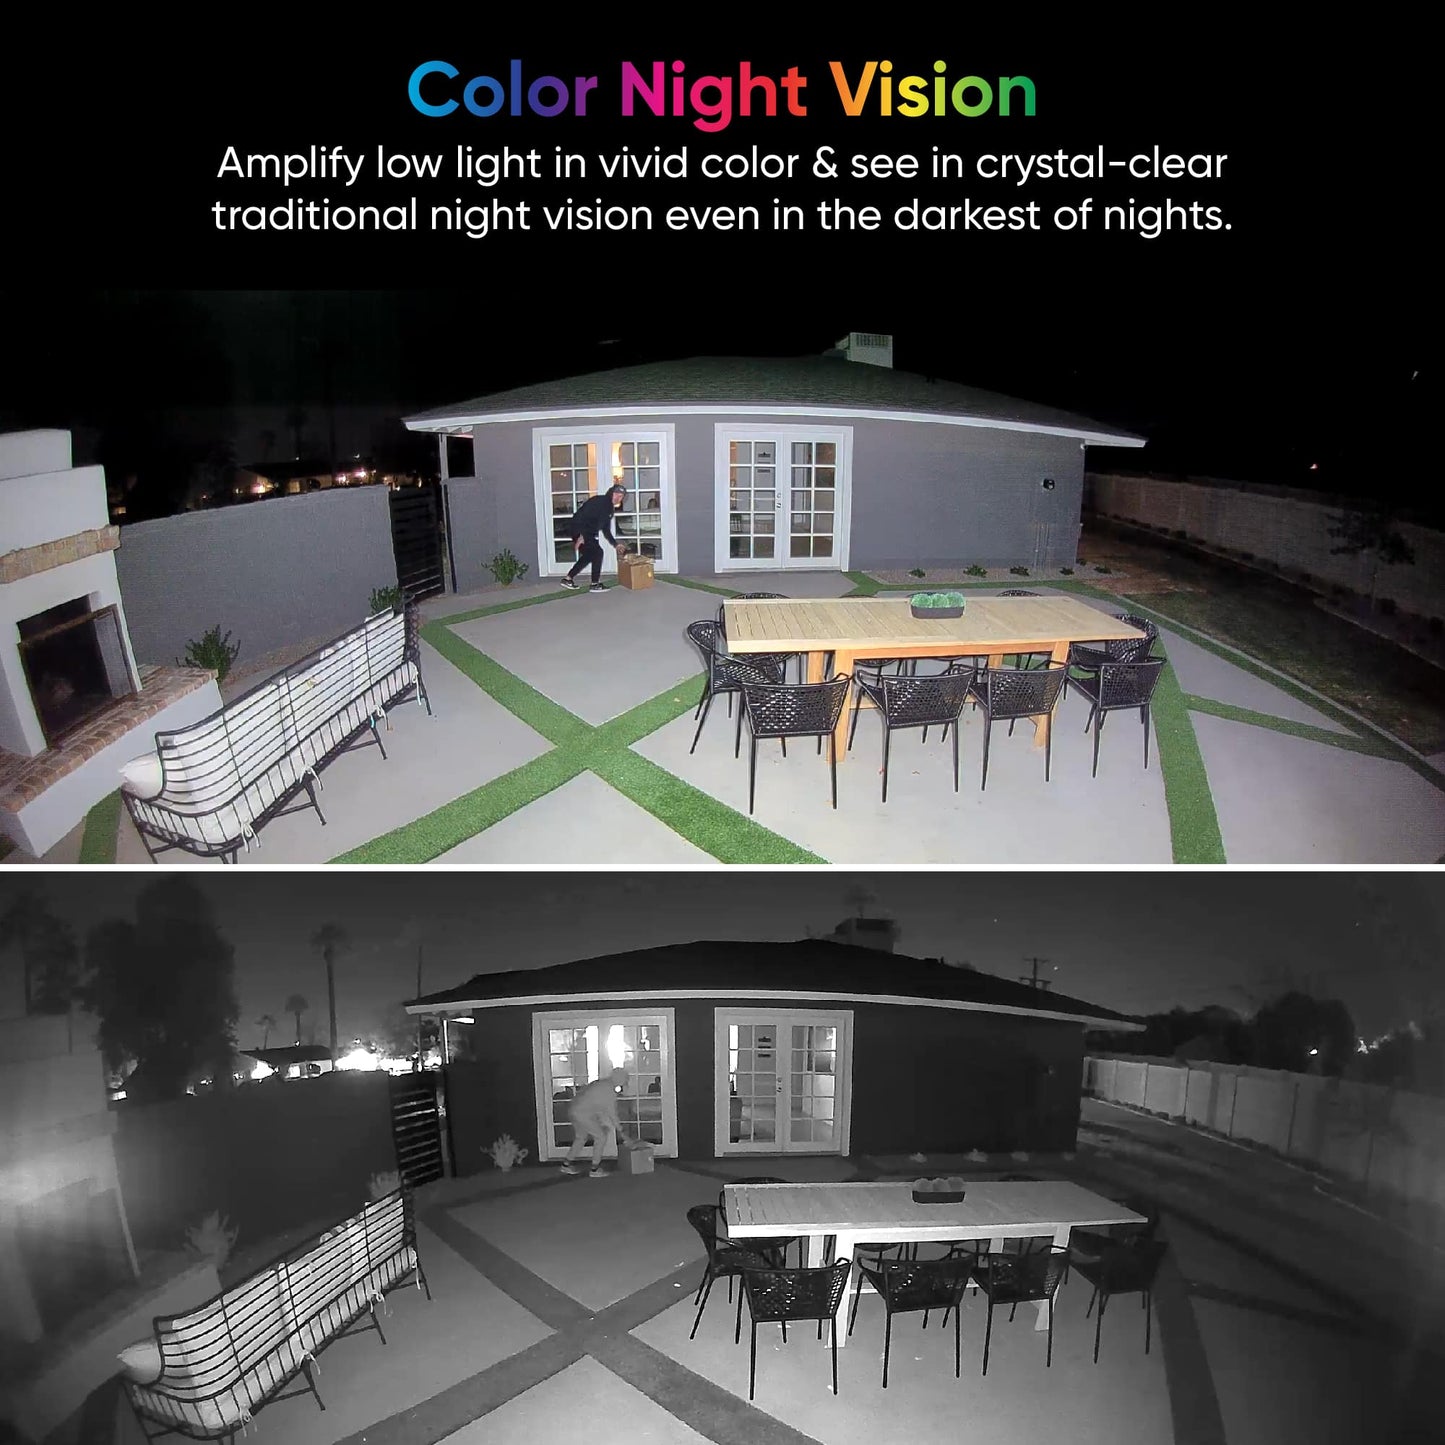 Comparison of Color Night Vision technology vs traditional black and white night vision.